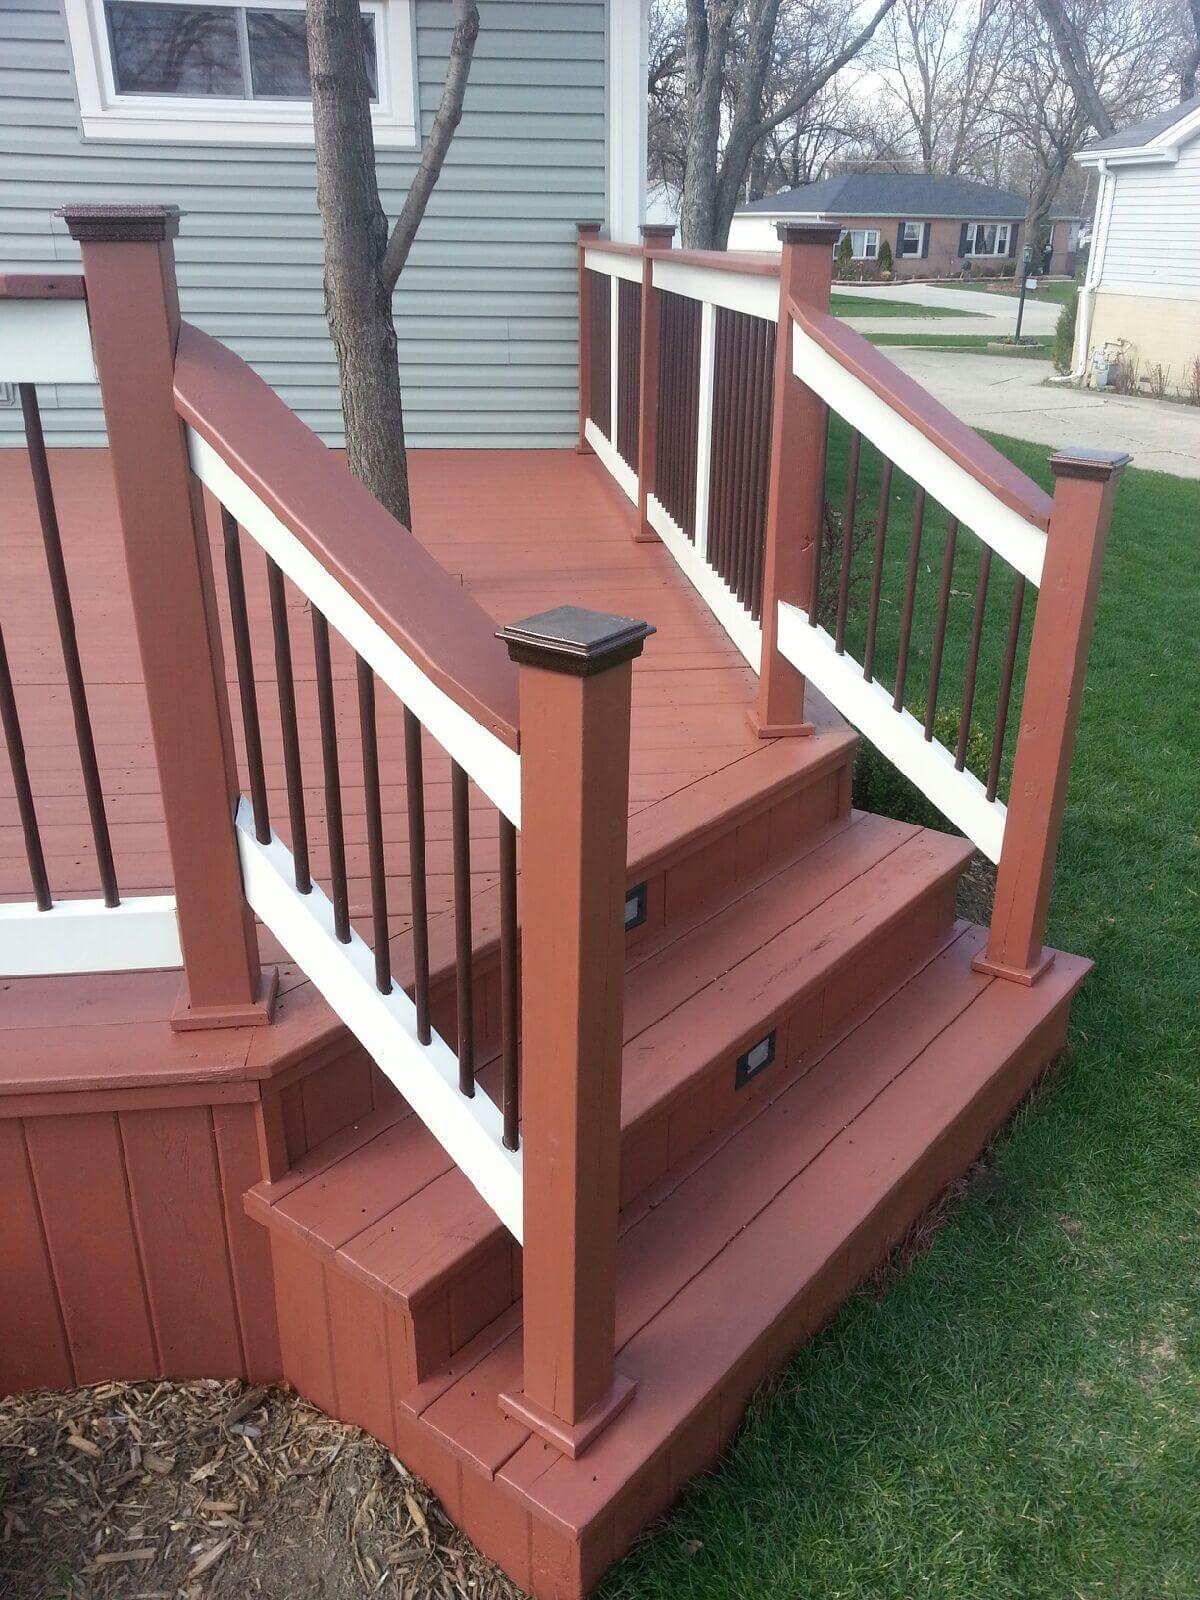 Repairs and maintenance for your deck, fence, and exterior wood staining. - Deck Staining Round Lake - Deck Cleaning Services